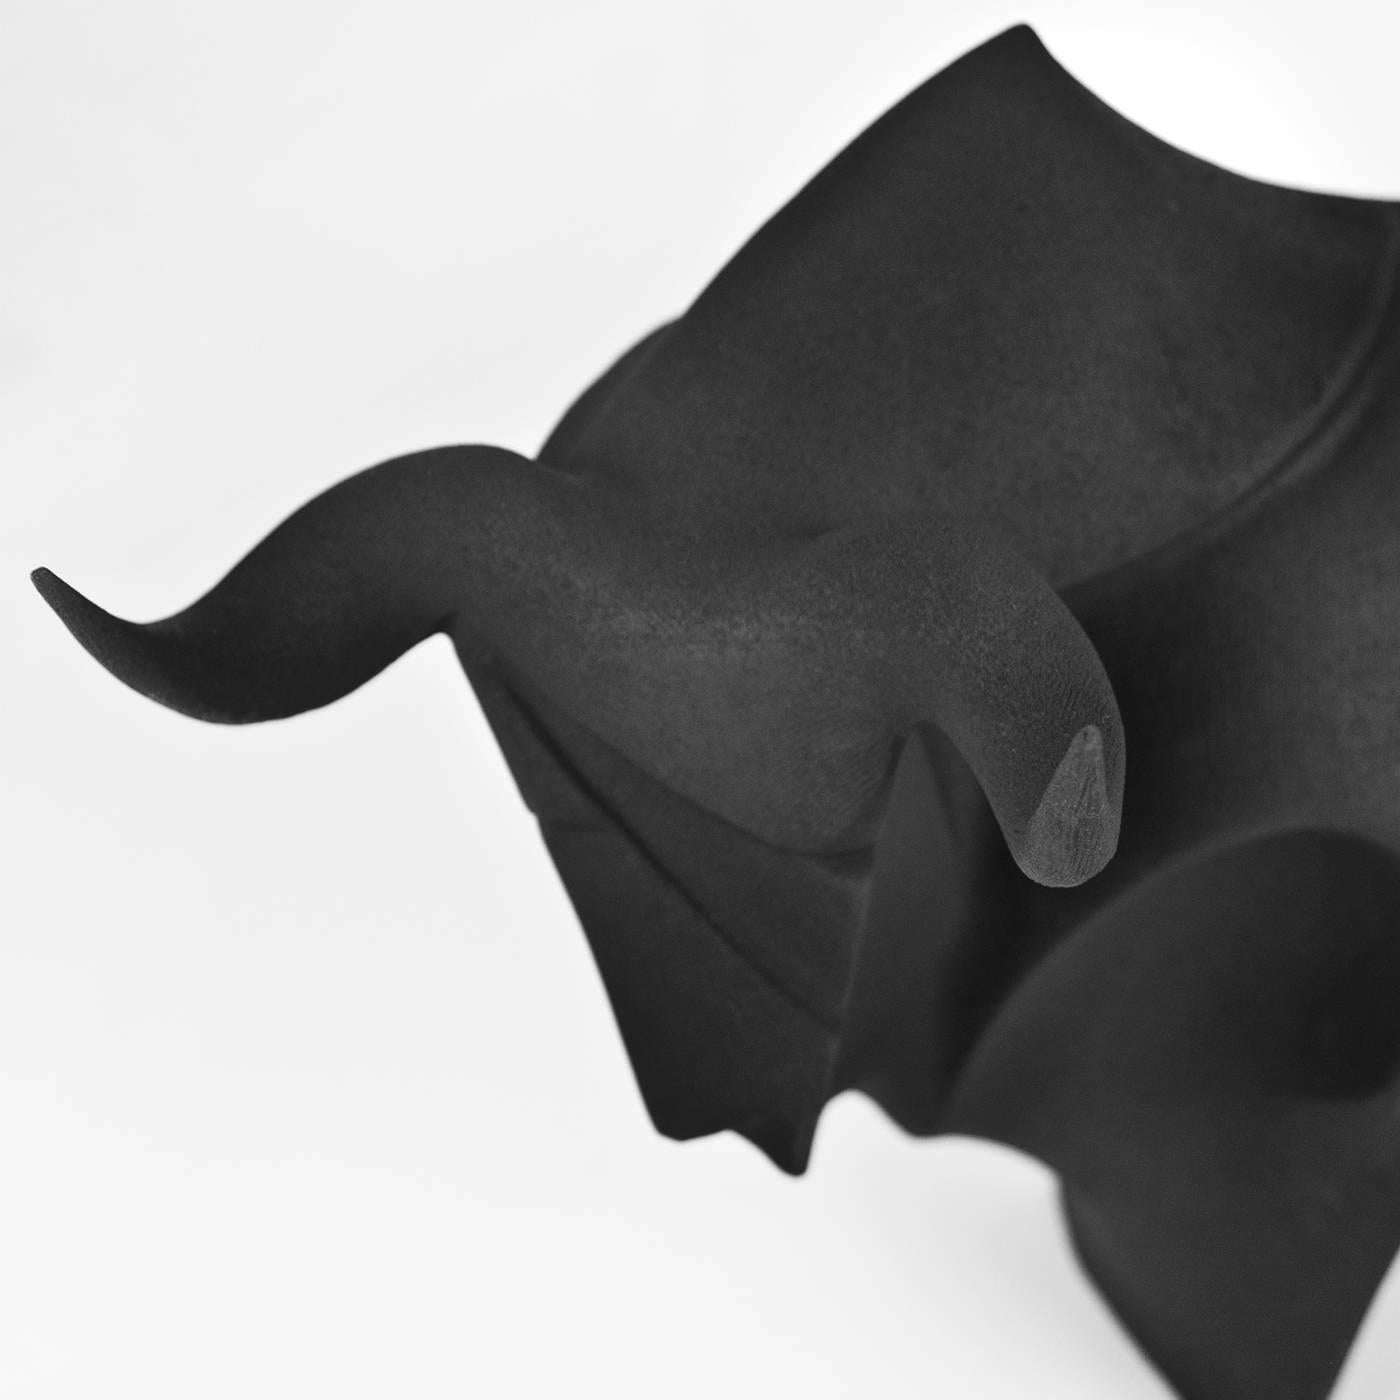 Completely handmade of ceramic, the matte black finish of this remarkable piece adds dramatic force to the sinuous geometric shape of the bull, regarded in ancient times as a symbol of prosperity. The strength and regal poise of this eye-catching